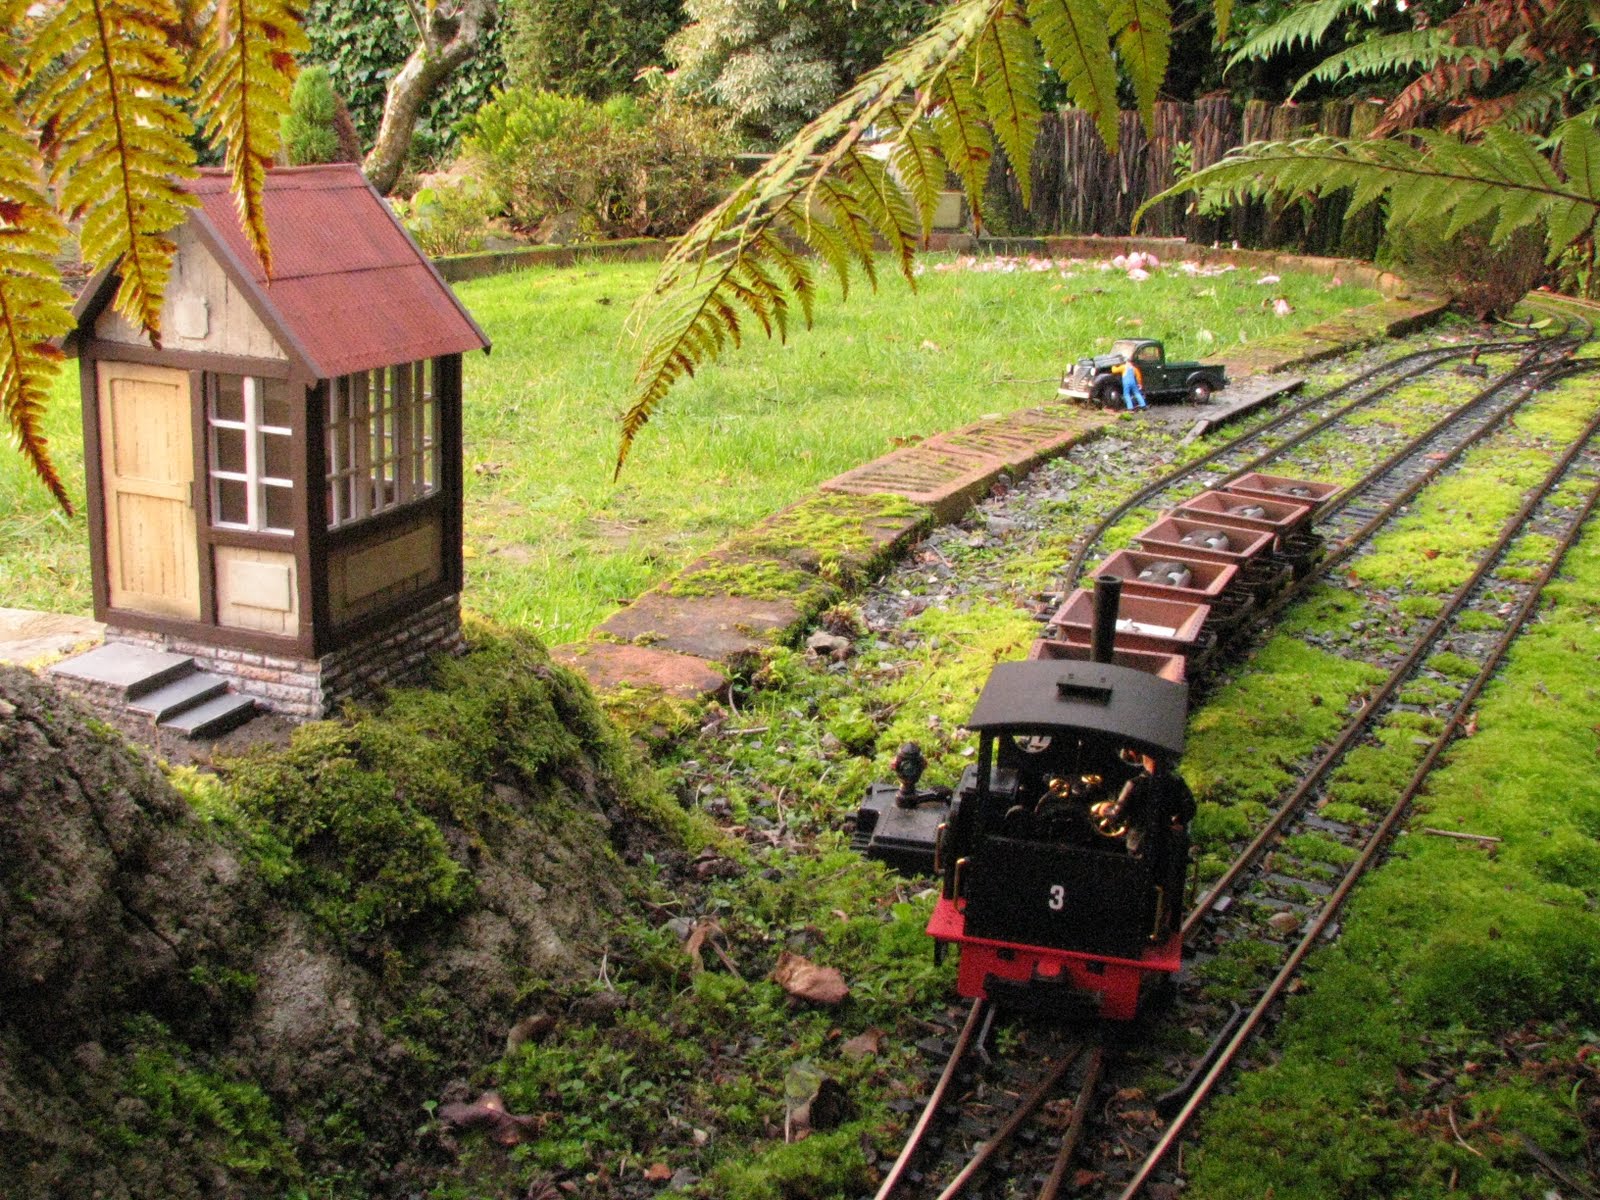 Track and ballast realism and compromise - Garden Railway Club